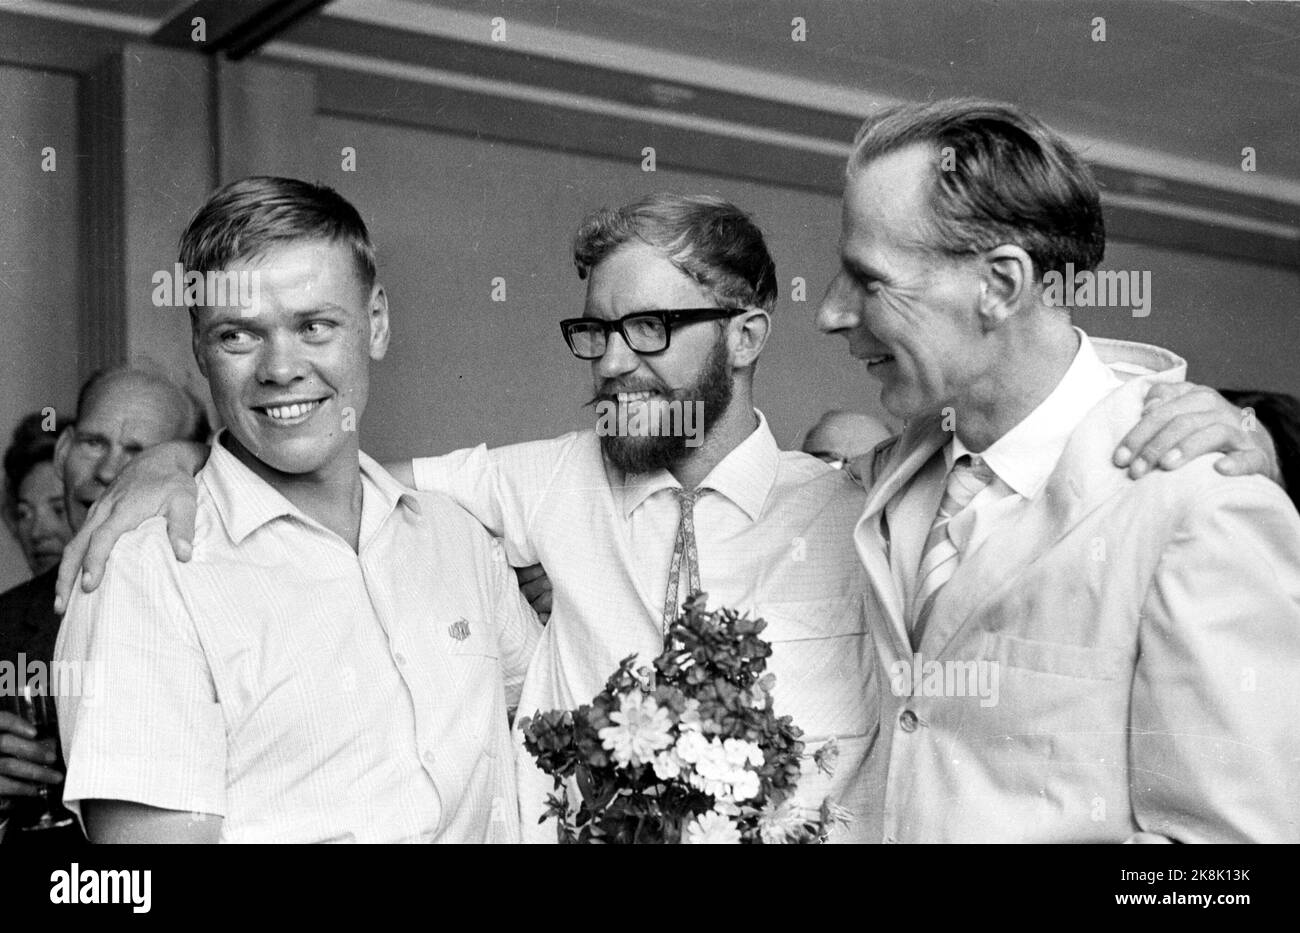 Oslo 19640816: Tirich Mir Expedition back home. Arrival Fornebu Airport. Professor Arne Næs, civil engineer Ralph Høibakk, civil engineer Anders Opdahl, doctor Kjell Friis Baastad and engineer Per Vigerust participated in the expedition. Professor Næs T.H. on the image. (missing names of the two other) neg 21891 NTB photo: Erik Thorberg Stock Photo